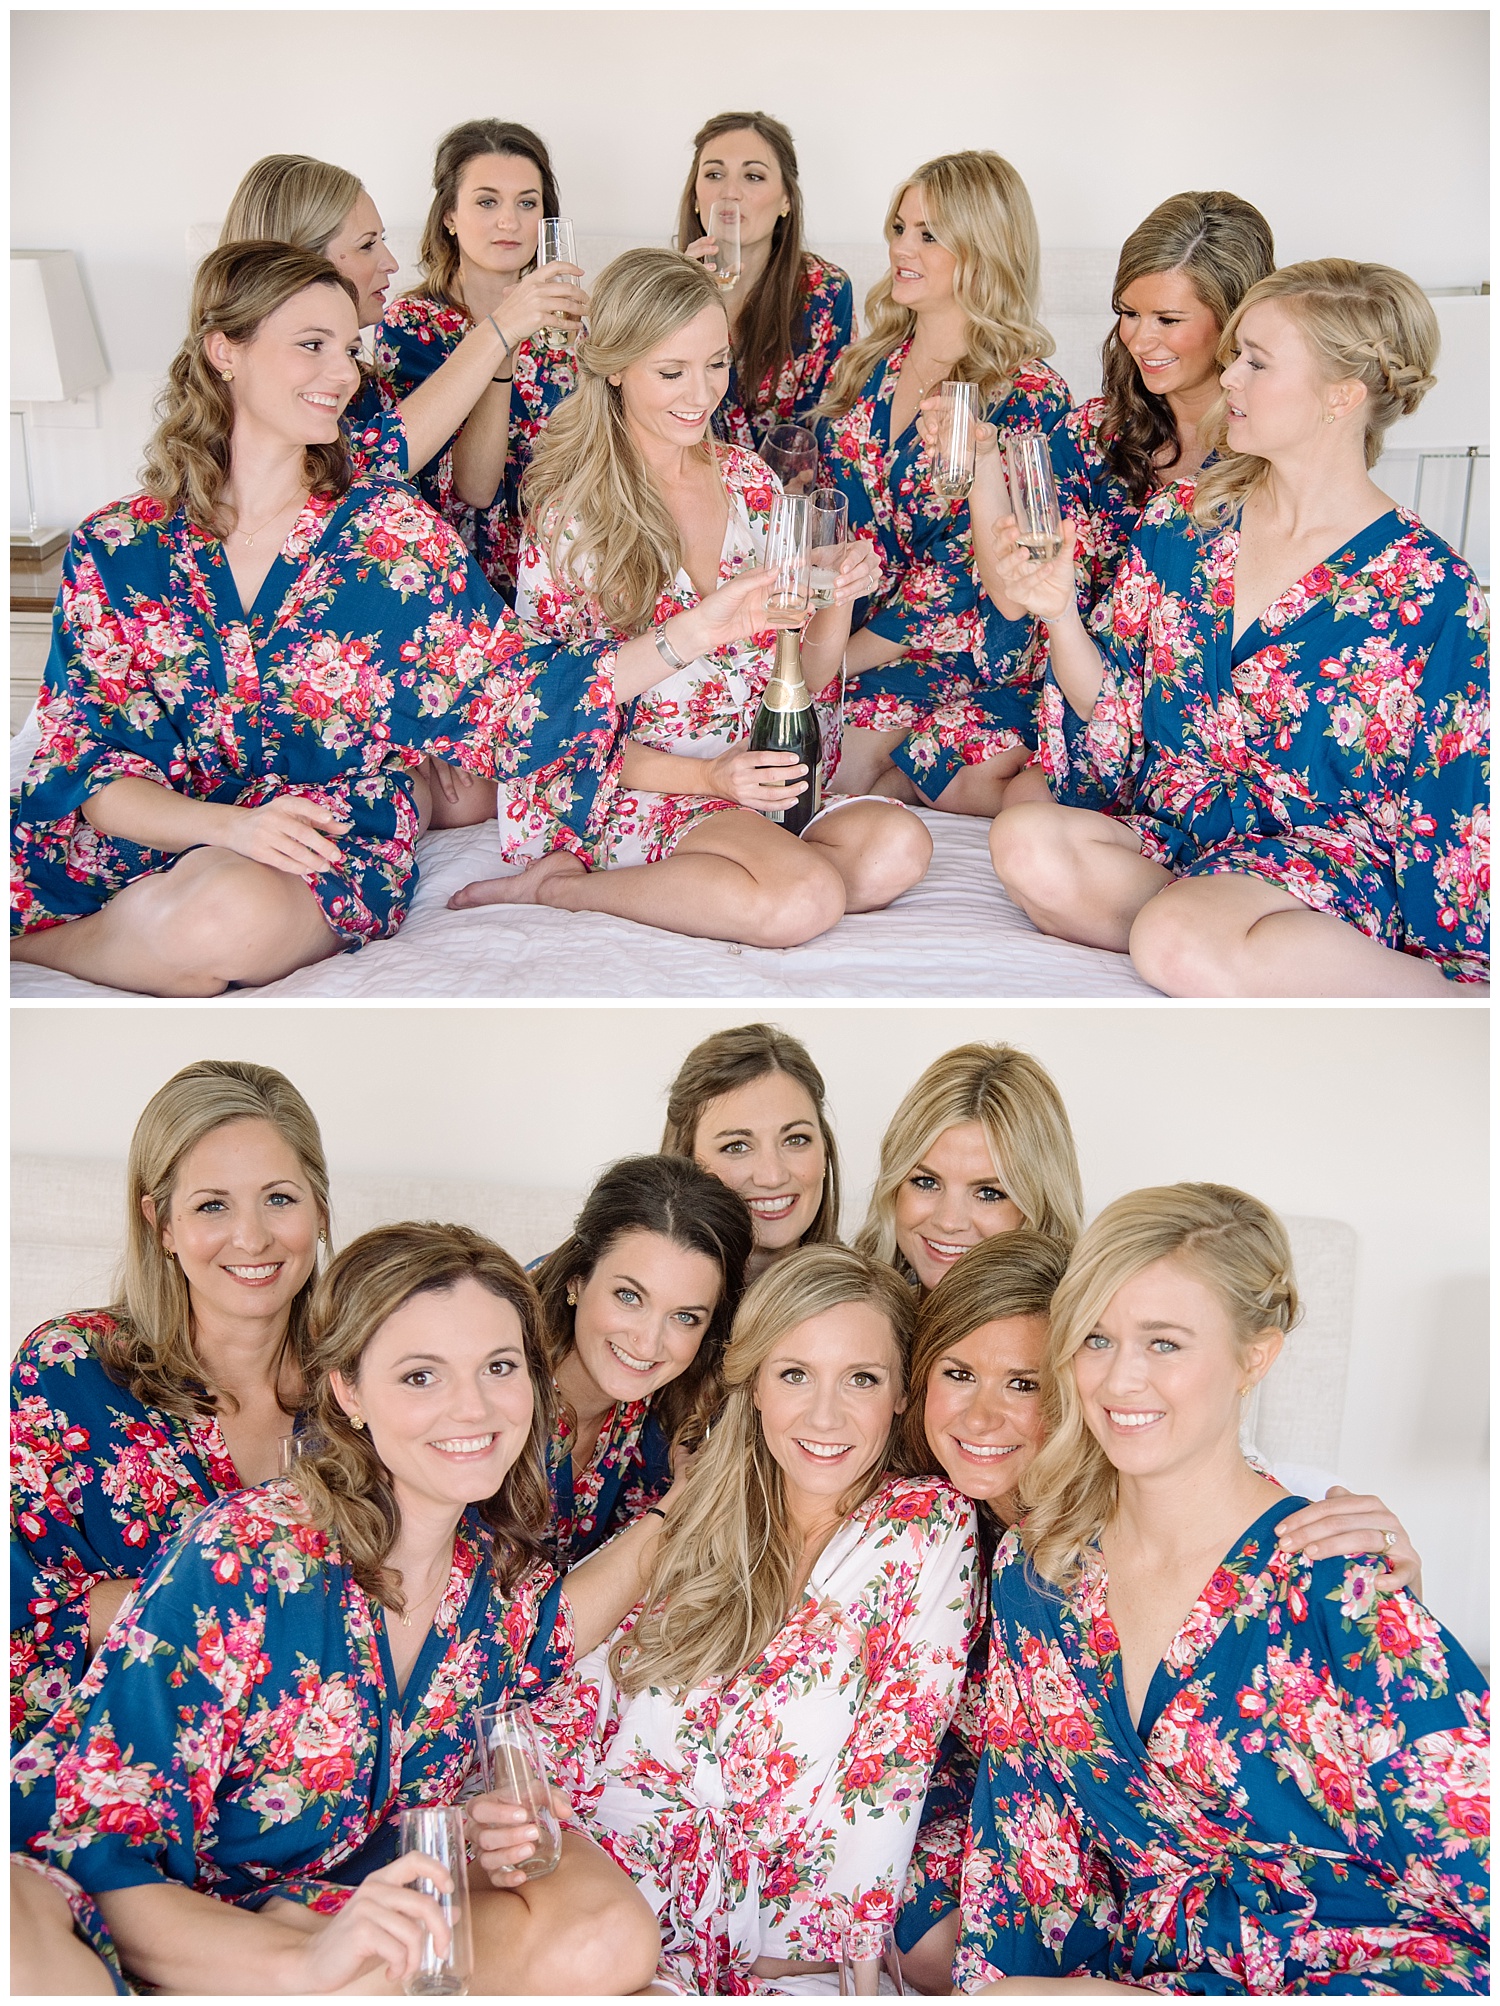 Bridesmaids in Floral Robes | Lindsey and Jeff's Intimate Wedding at Grant Humphrey's Mansion | Denver Colorado Photographer | Farm Wedding Photographer | Apollo Fields Photojournalism